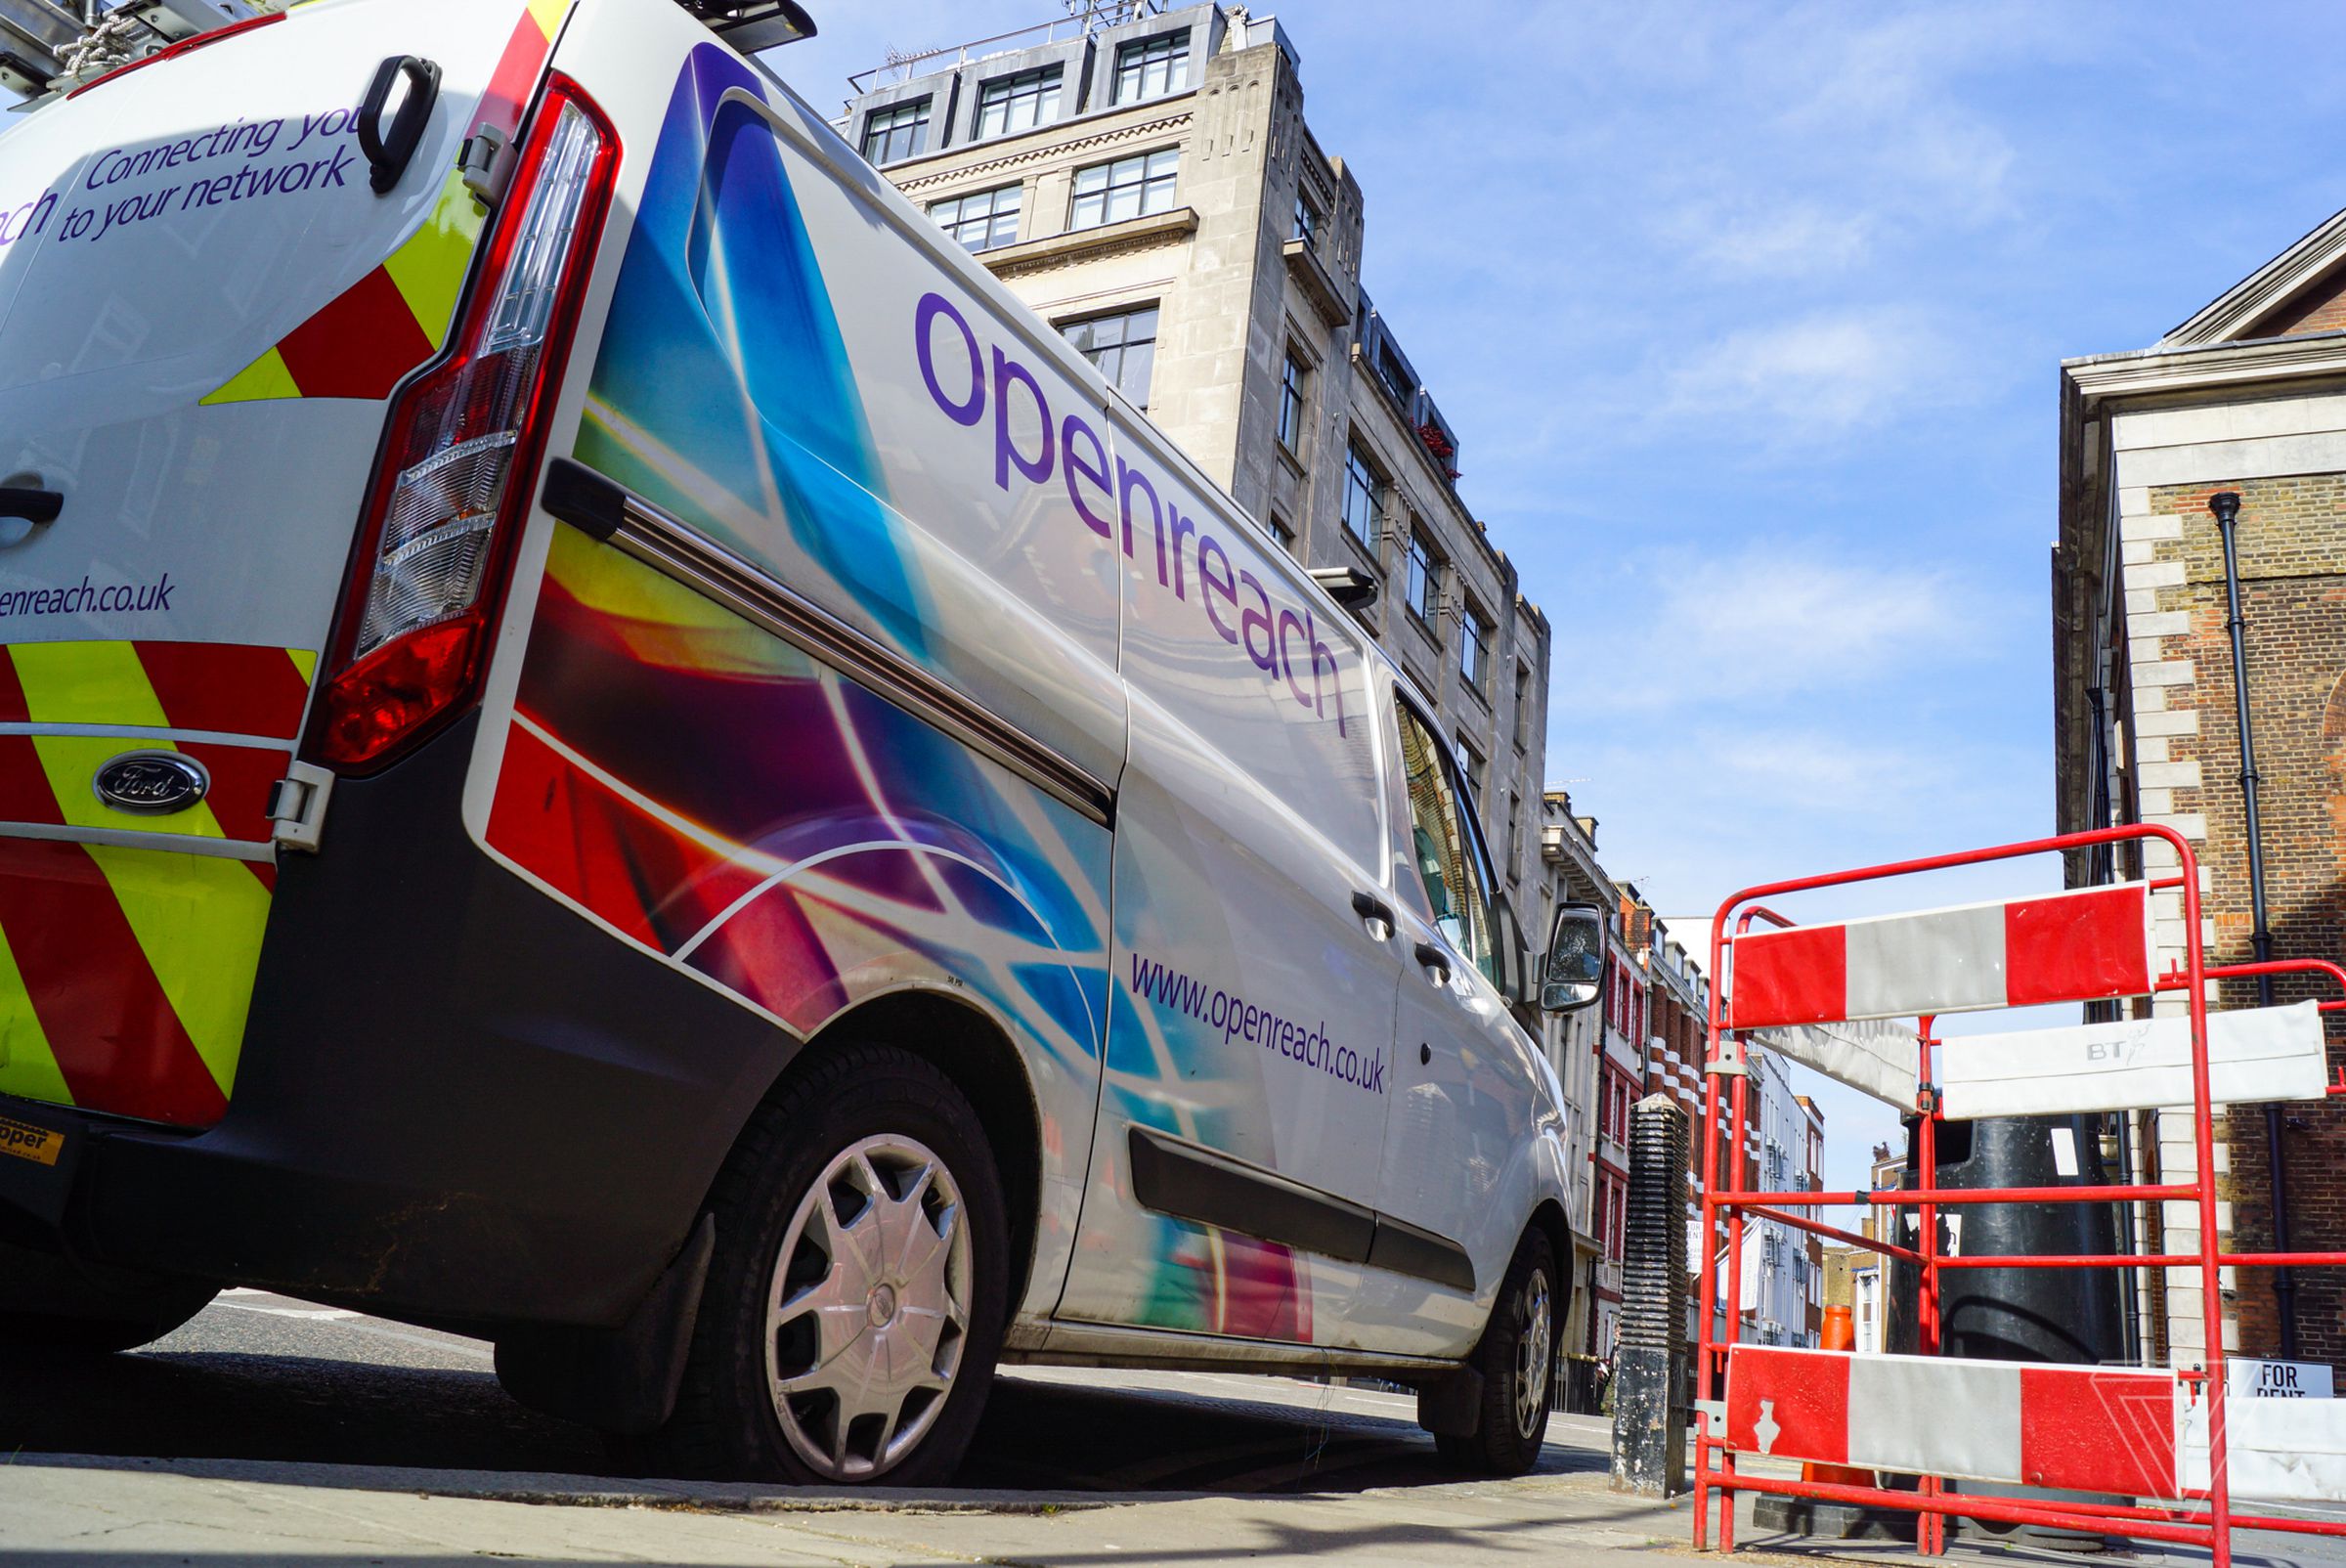 An Openreach van parked in central London. Openreach, a subsidiary of British Telecom, is the biggest company for maintaining the physical infrastructure on behalf of ISP’s who sell the services to users.